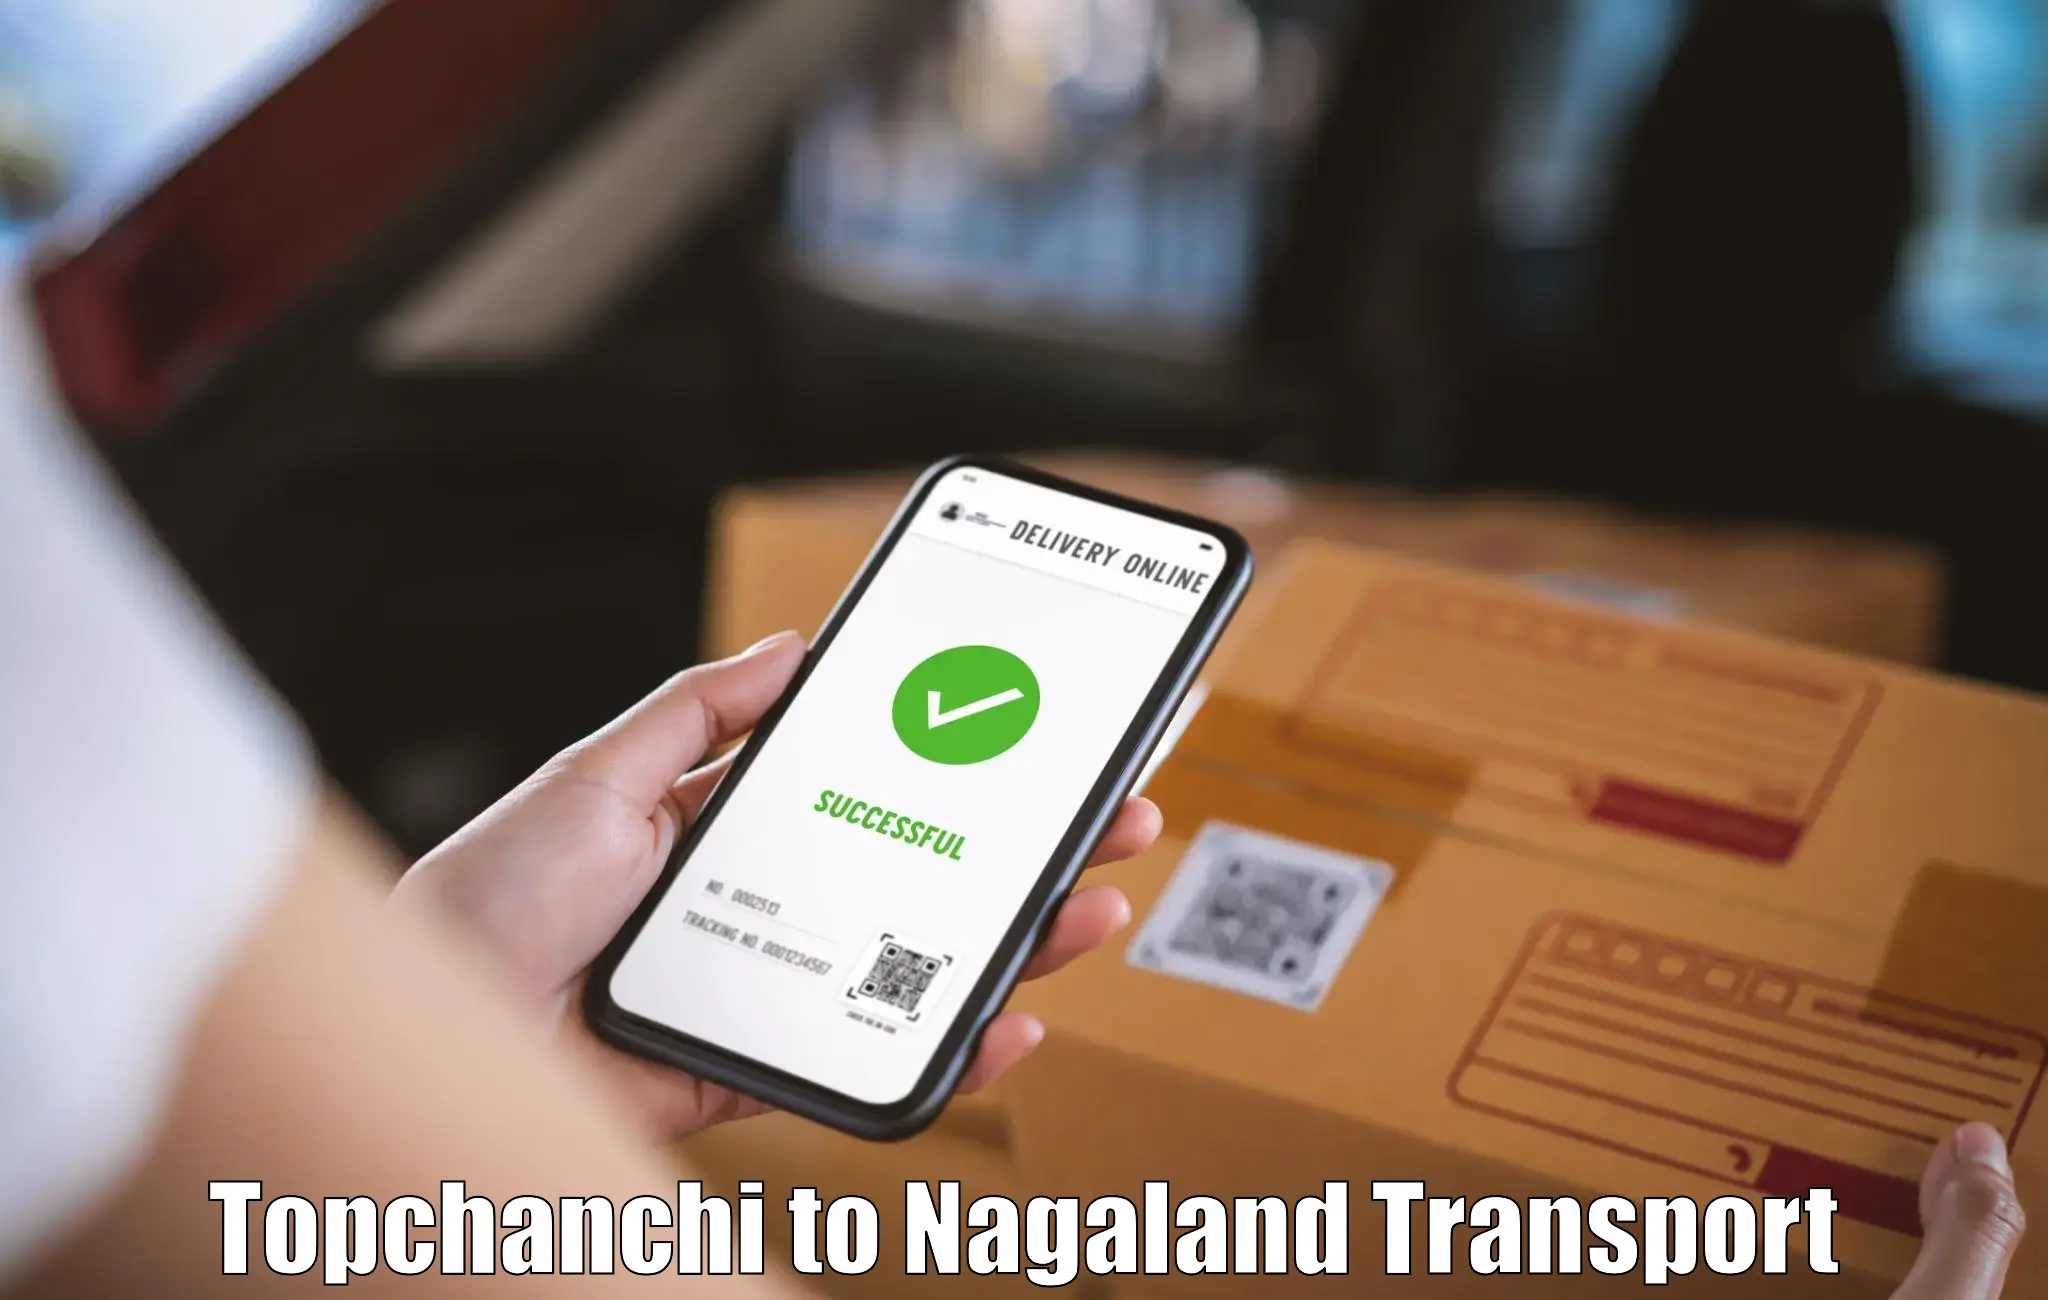 Container transport service Topchanchi to NIT Nagaland